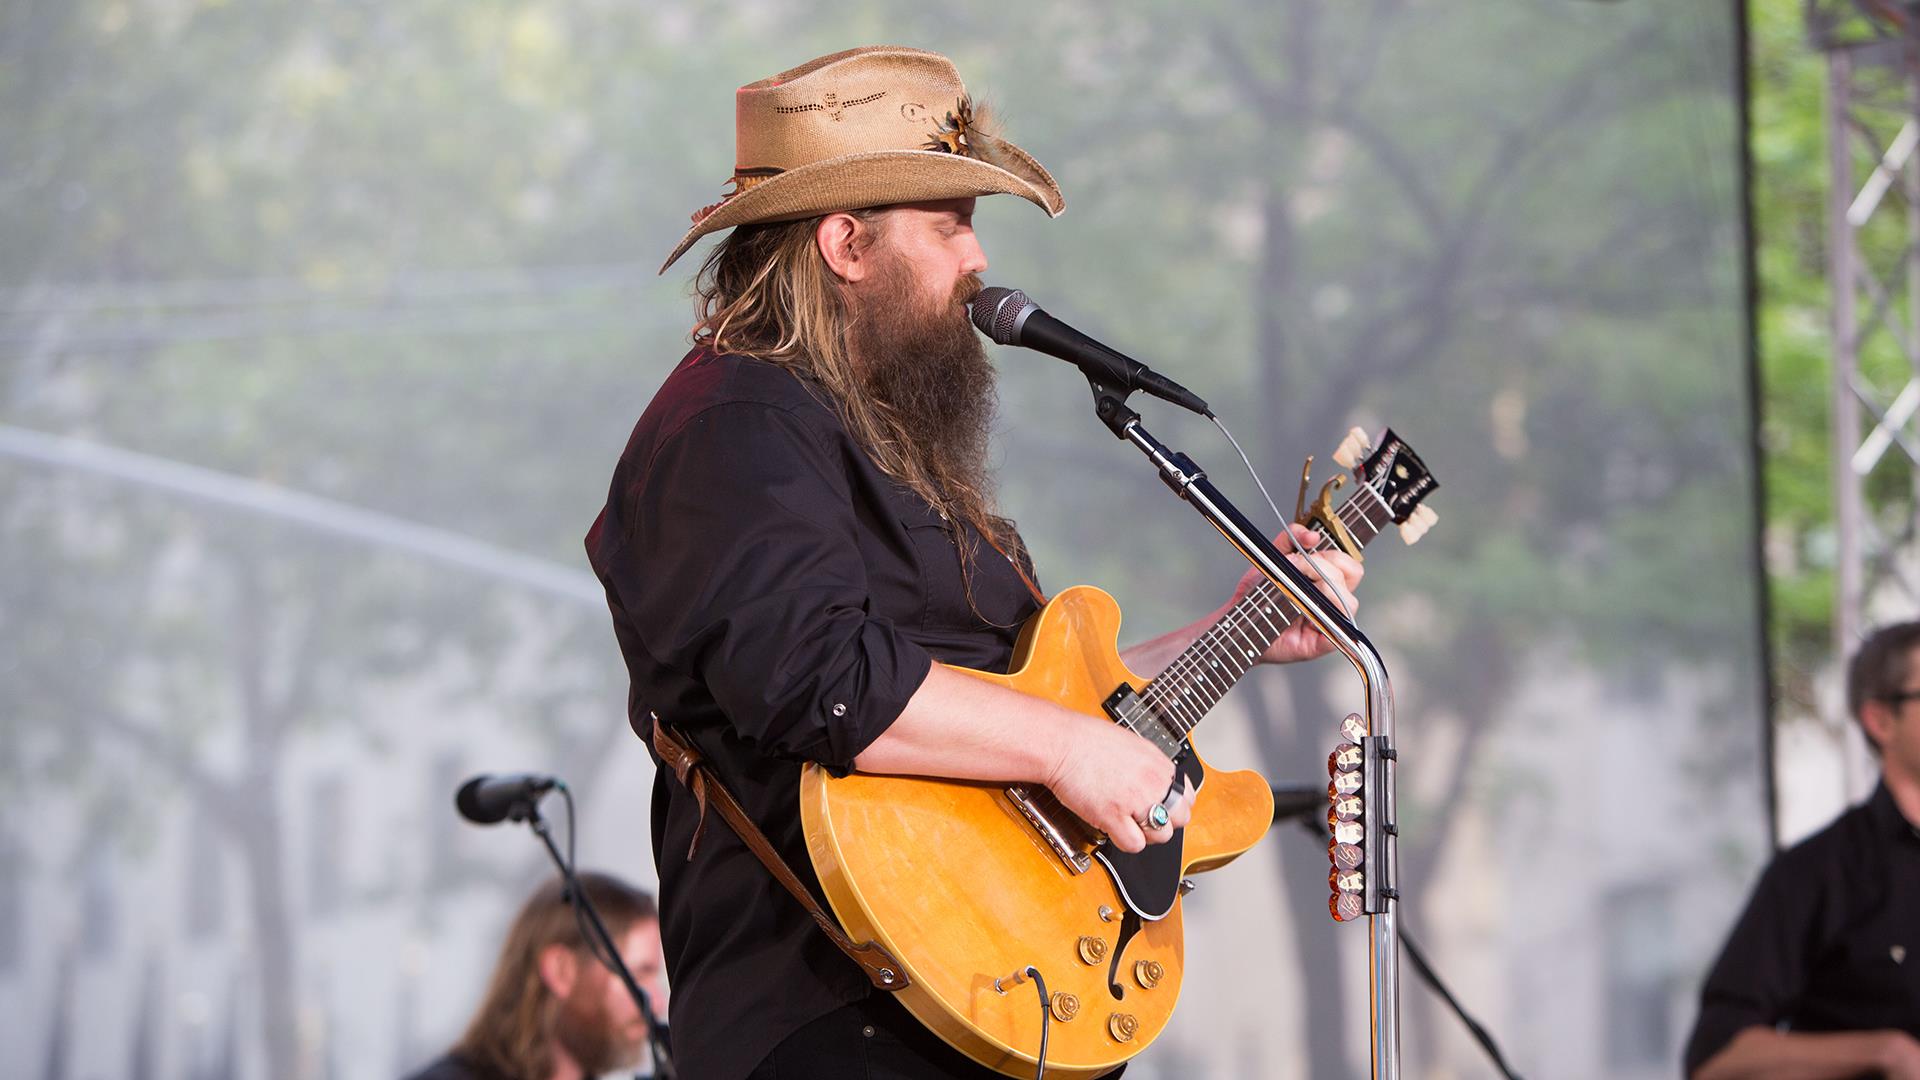 See Chris Stapleton sing 'Tennessee Whiskey' live on TODAY.